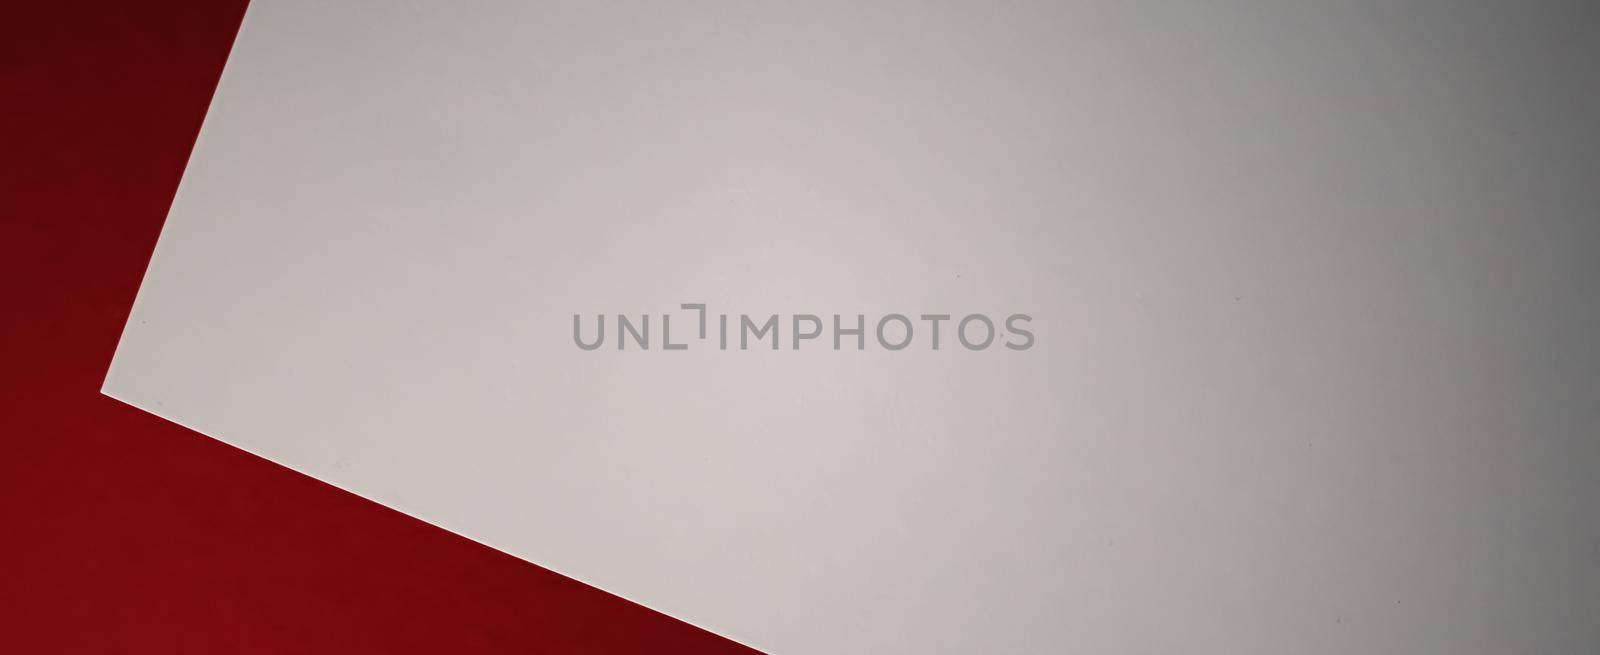 Blank A4 paper, white on red background as office stationery flatlay, luxury branding flat lay and brand identity design for mockup.